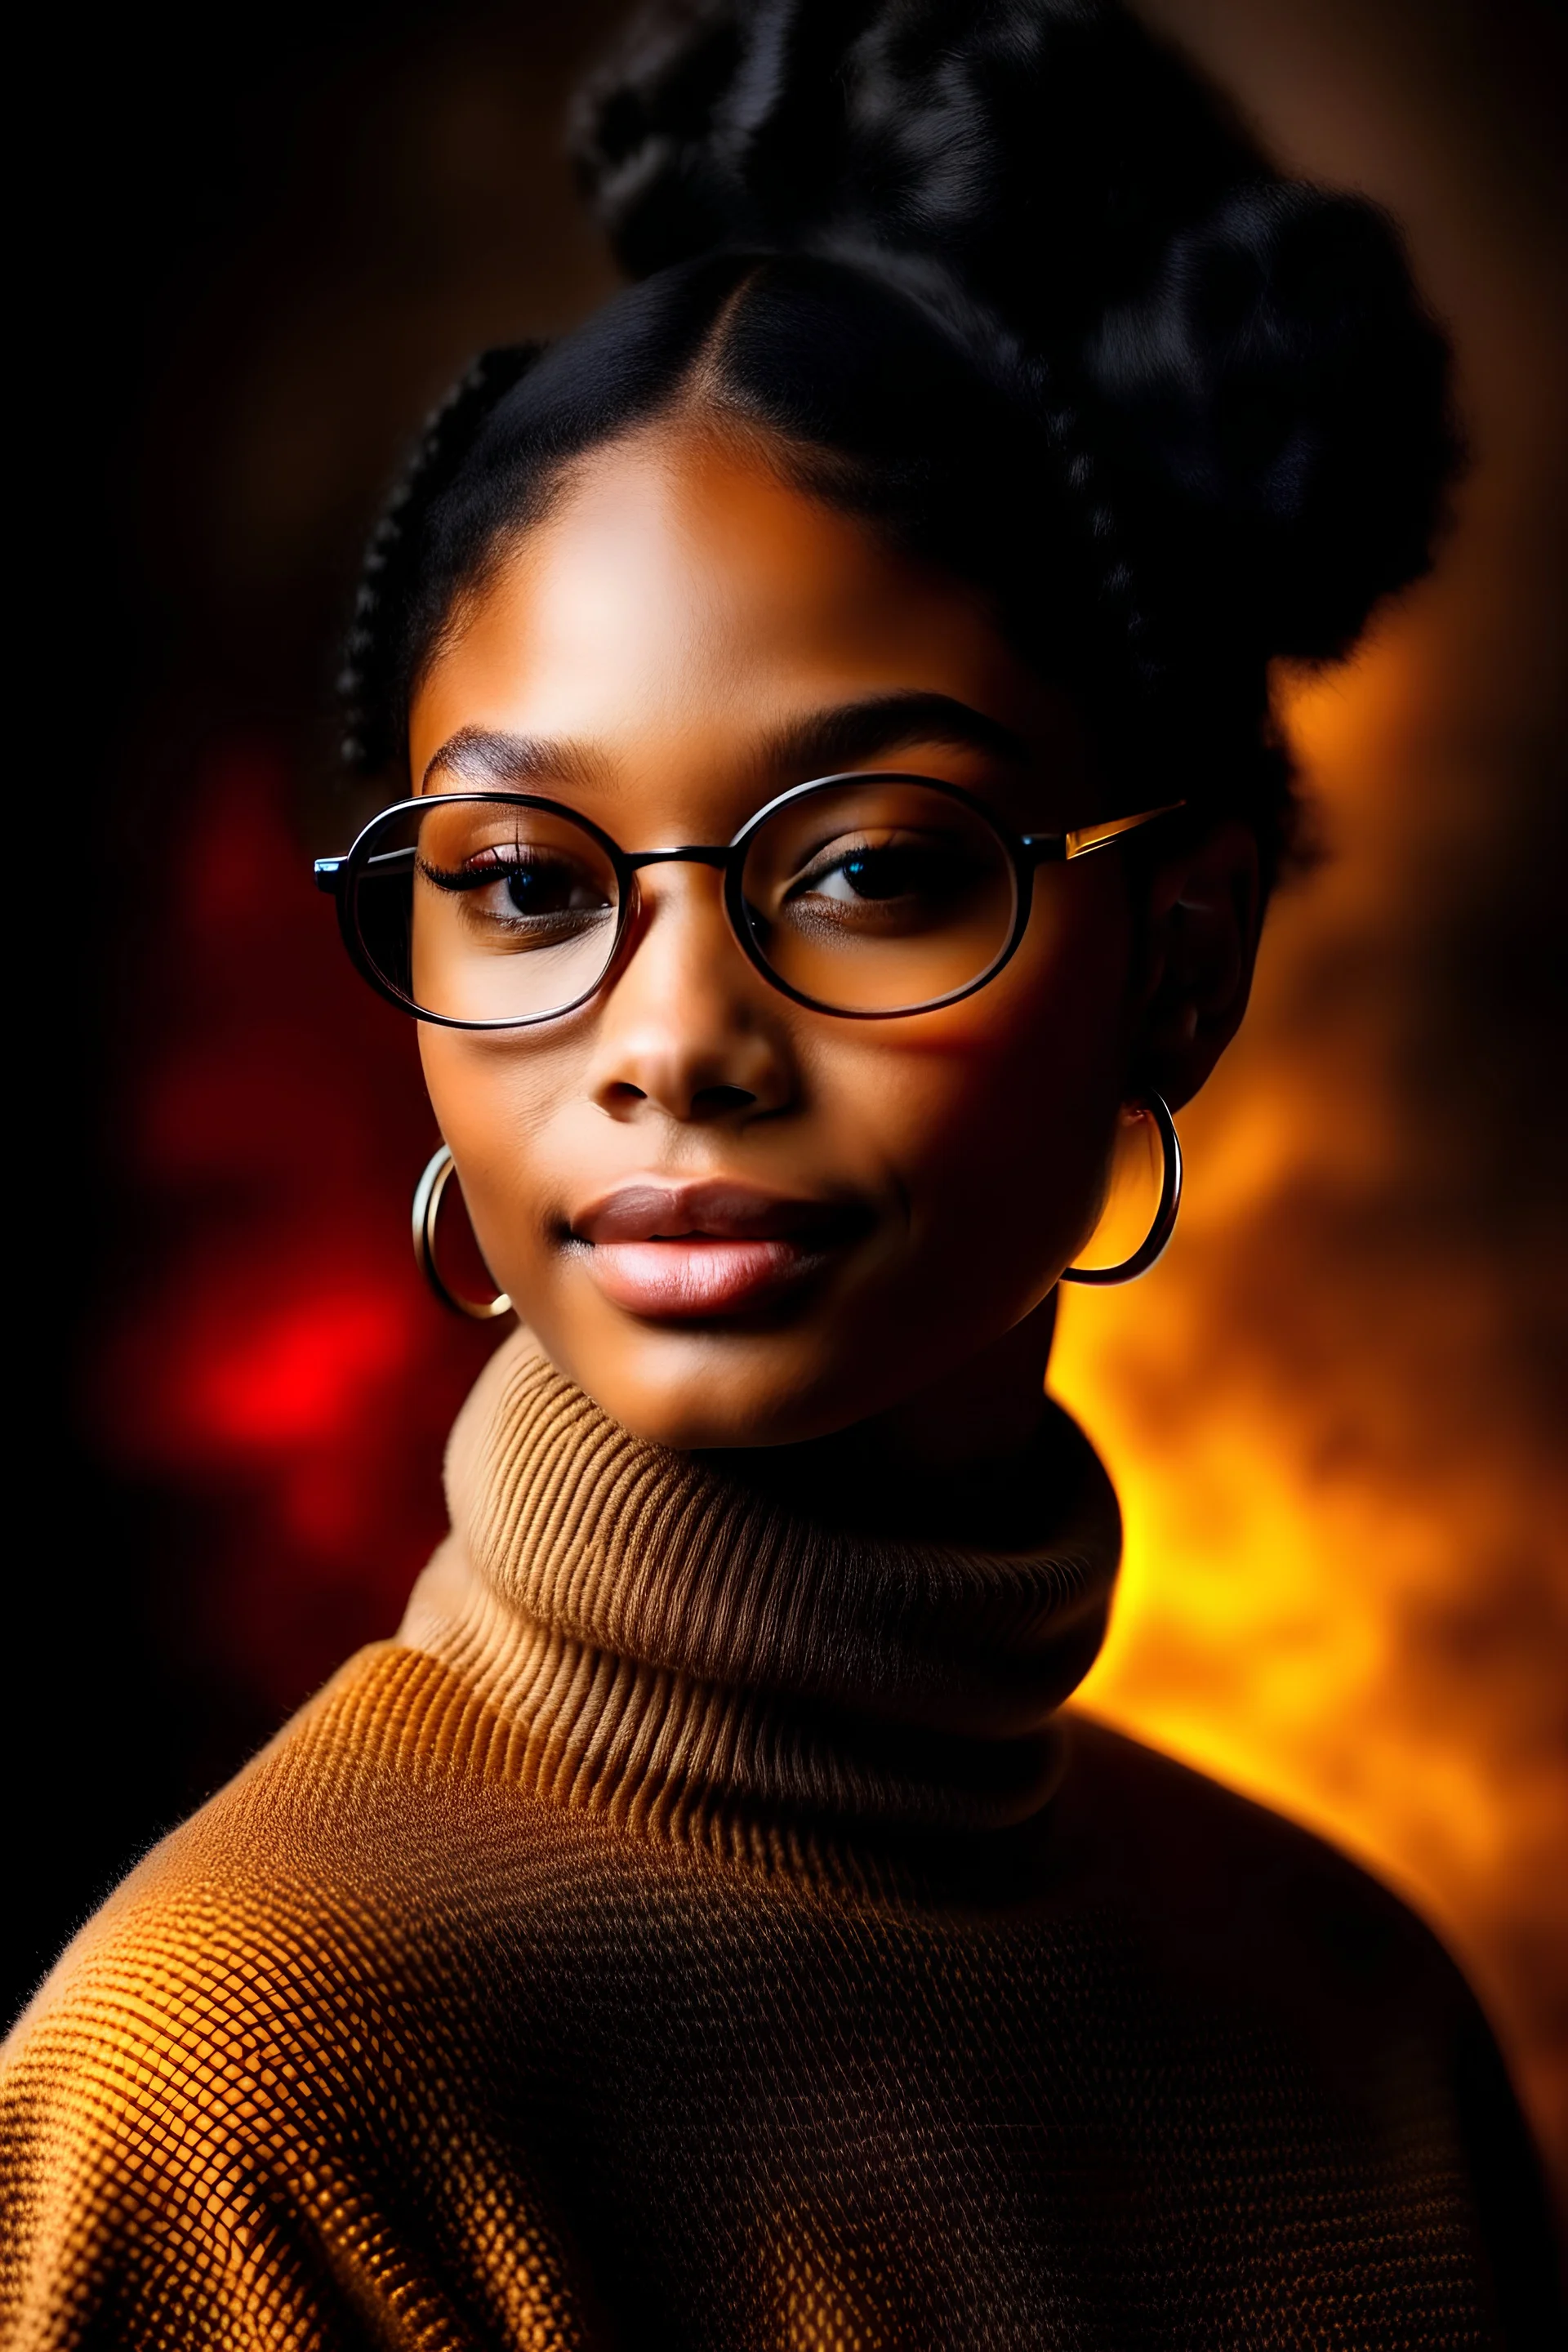 (Halle Bailey mixed with Vanessa Hudgens) is biracial and has soft dark brown European hair styled in an elegant bun, soft chubby rounded face, rounded soft eyebrows, very short neck, realistic rectangle-shape body, flat top of head, wears eyeglasses, small chest. She is wearing a beautiful feminine modest turtleneck wholesome Edwardian linen billowing ruffles layered voluminous bustle tea gown with feminine details and multiple petticoats underneath her skirt. She has Edwardian gloves on.